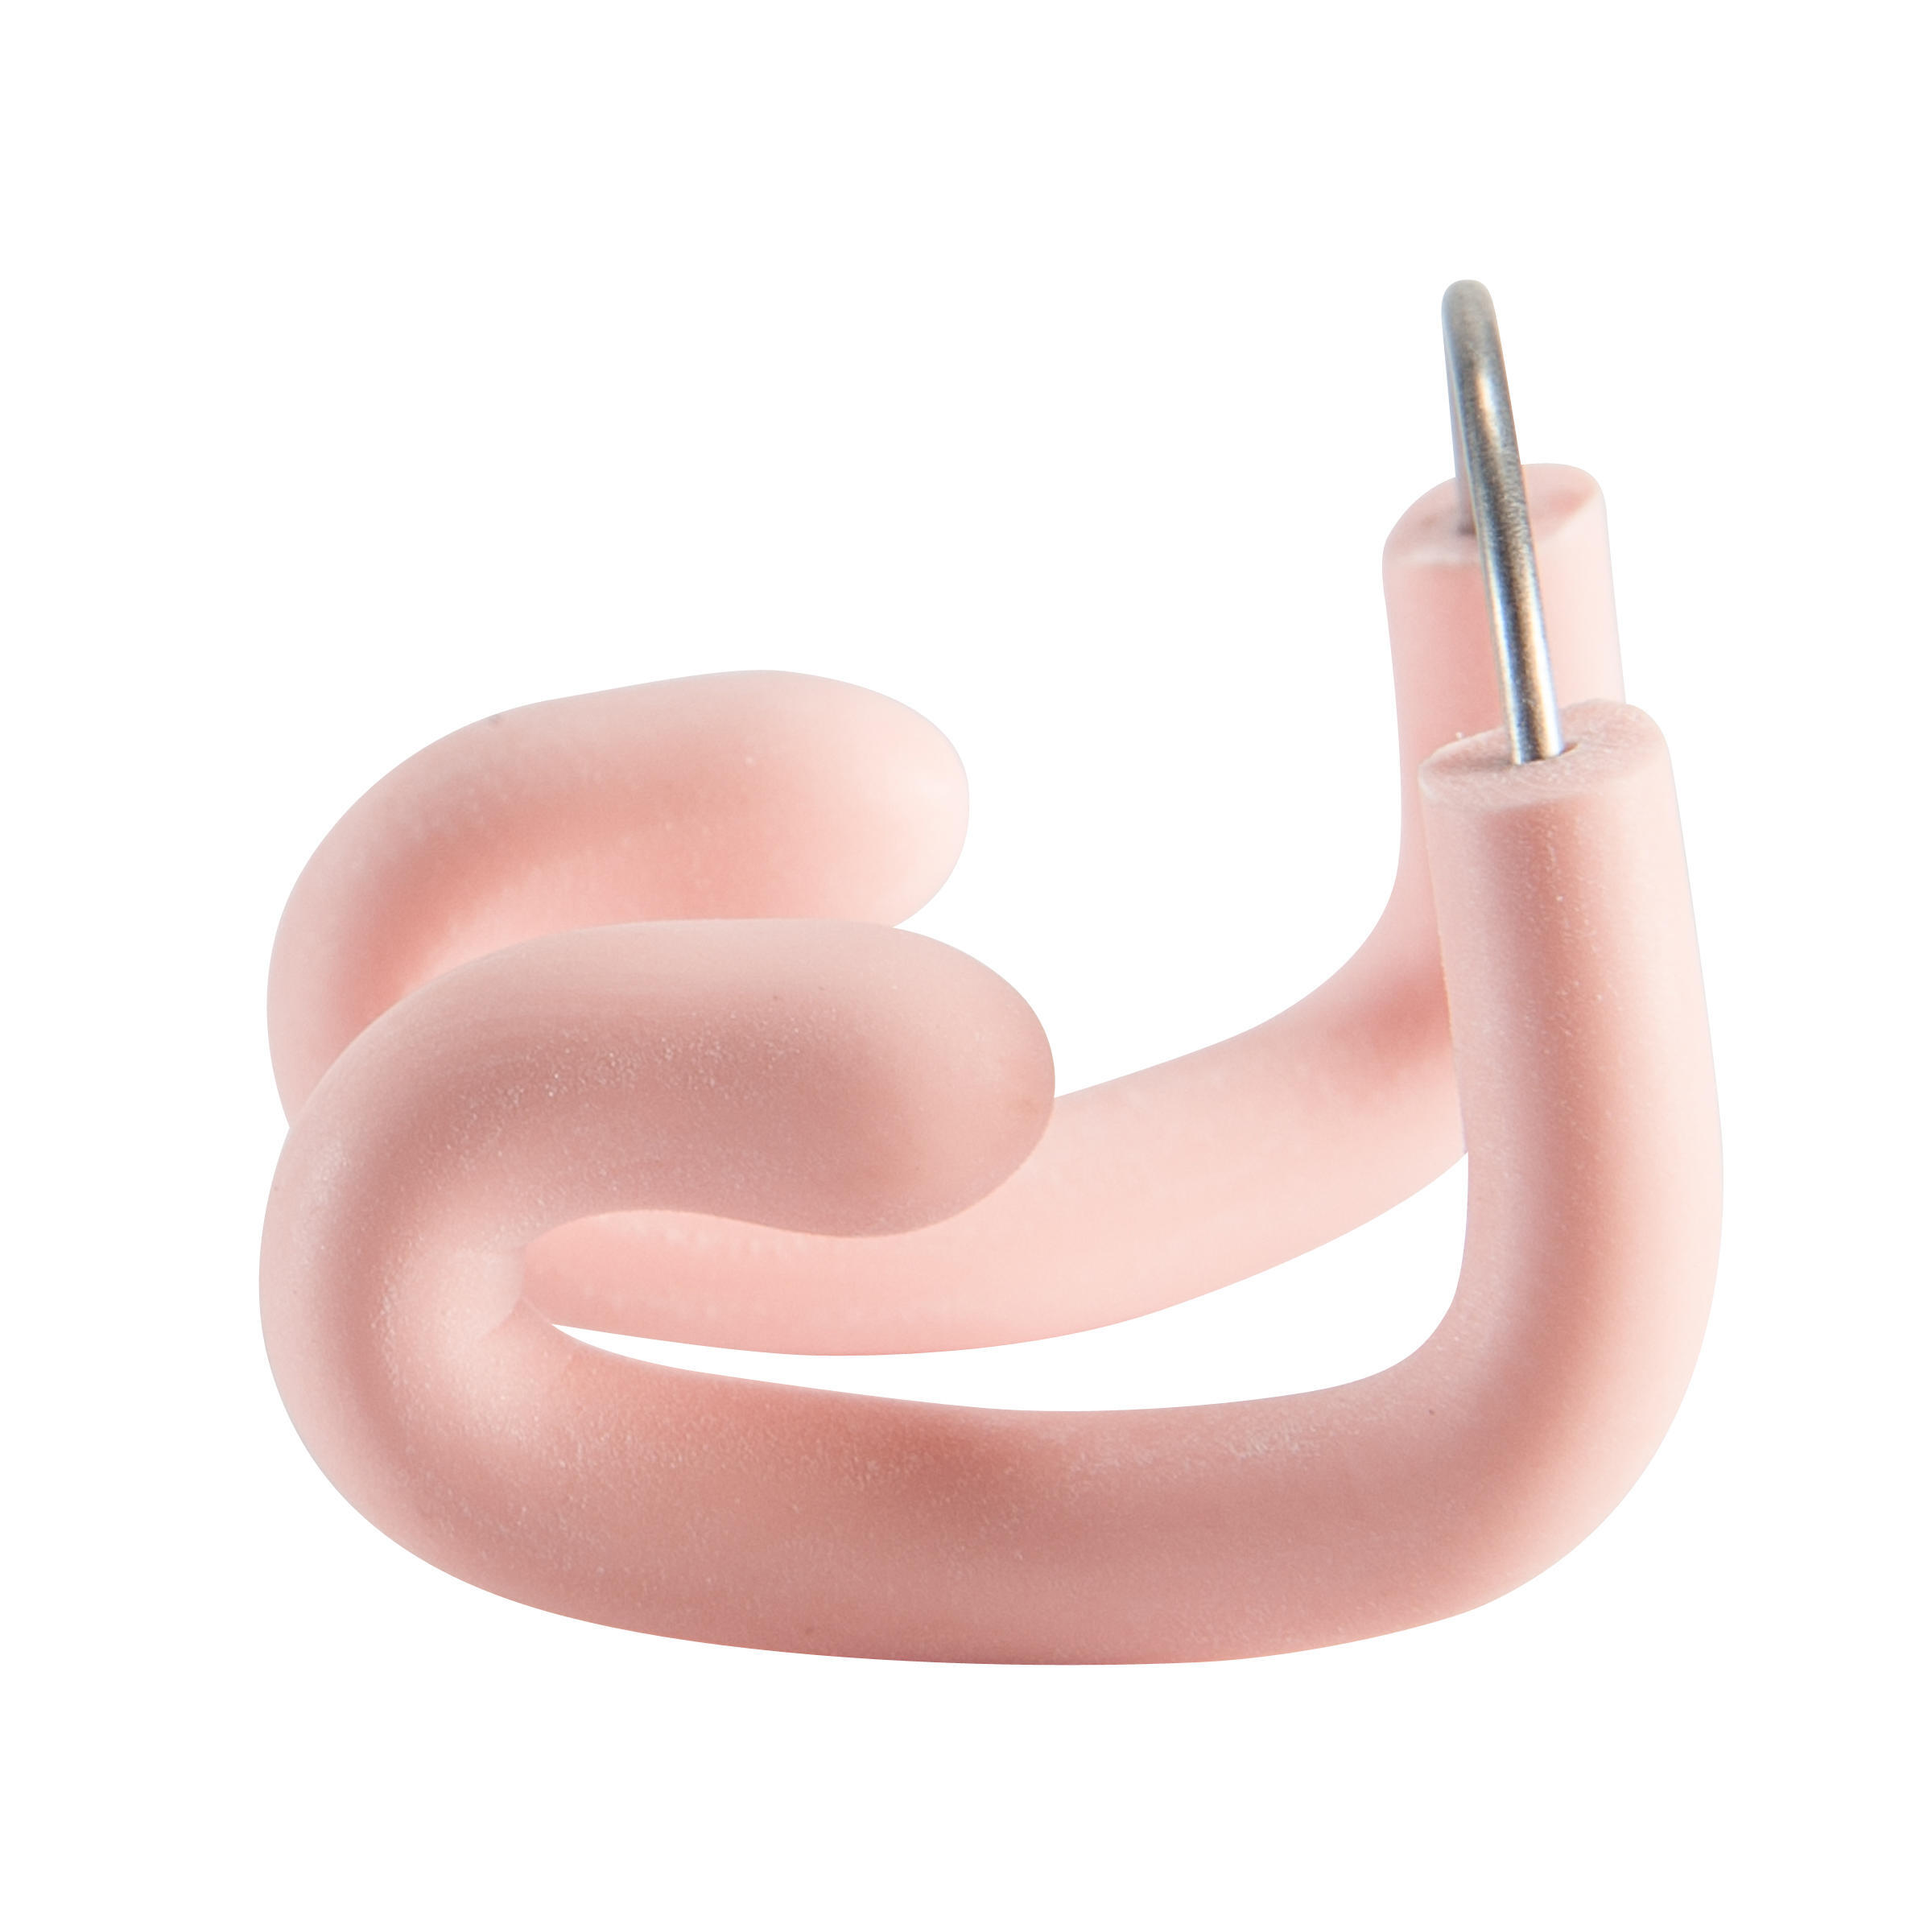 SWIMMING ADJUSTABLE STAINLESS STEEL-LATEX NOSE CLIP - PASTEL PINK 4/4